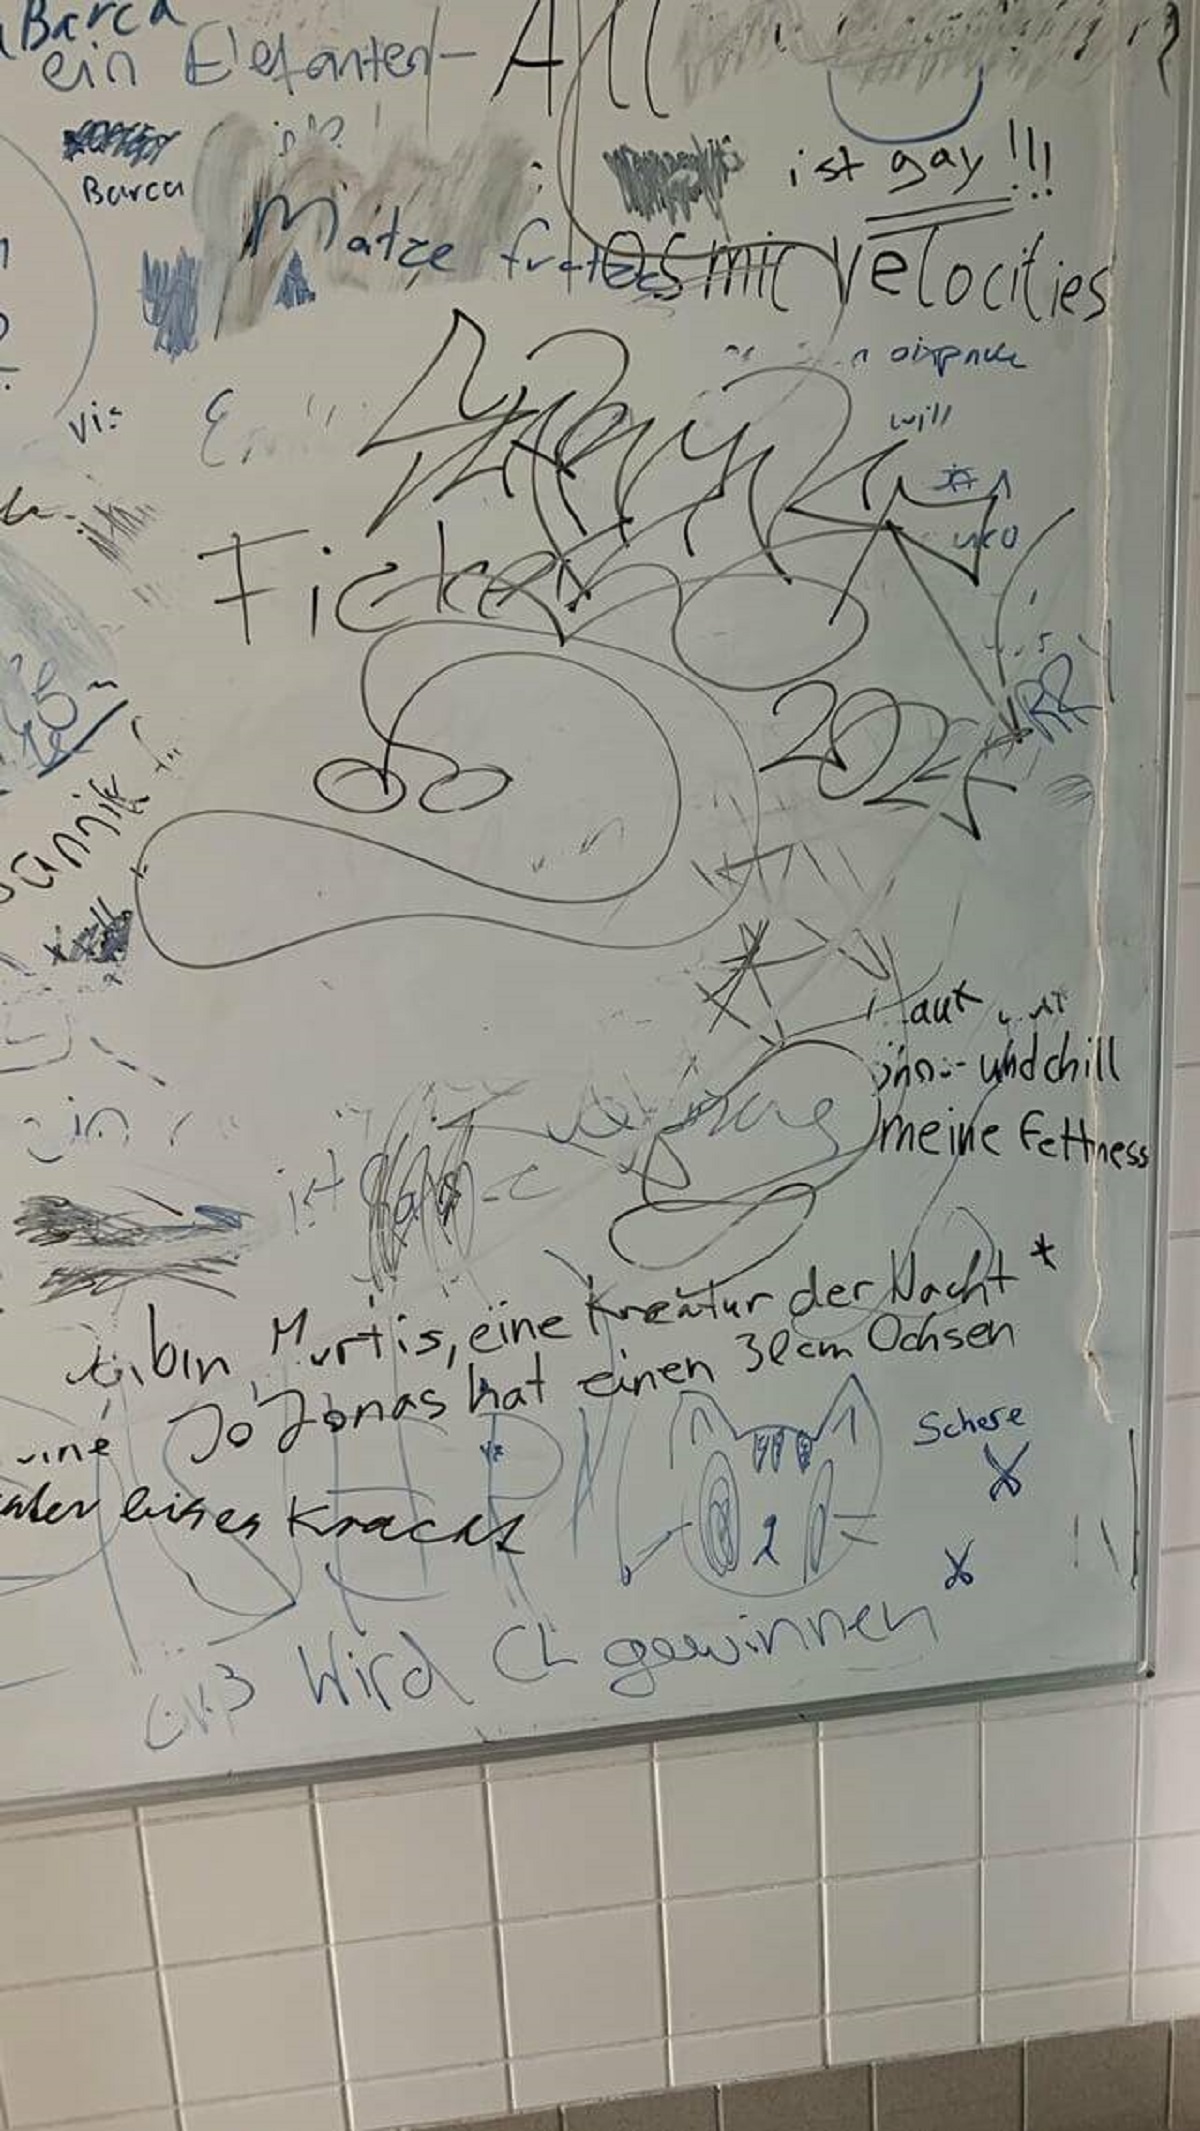 "My school put up whiteboards to stop vandalism in the toilet rooms"